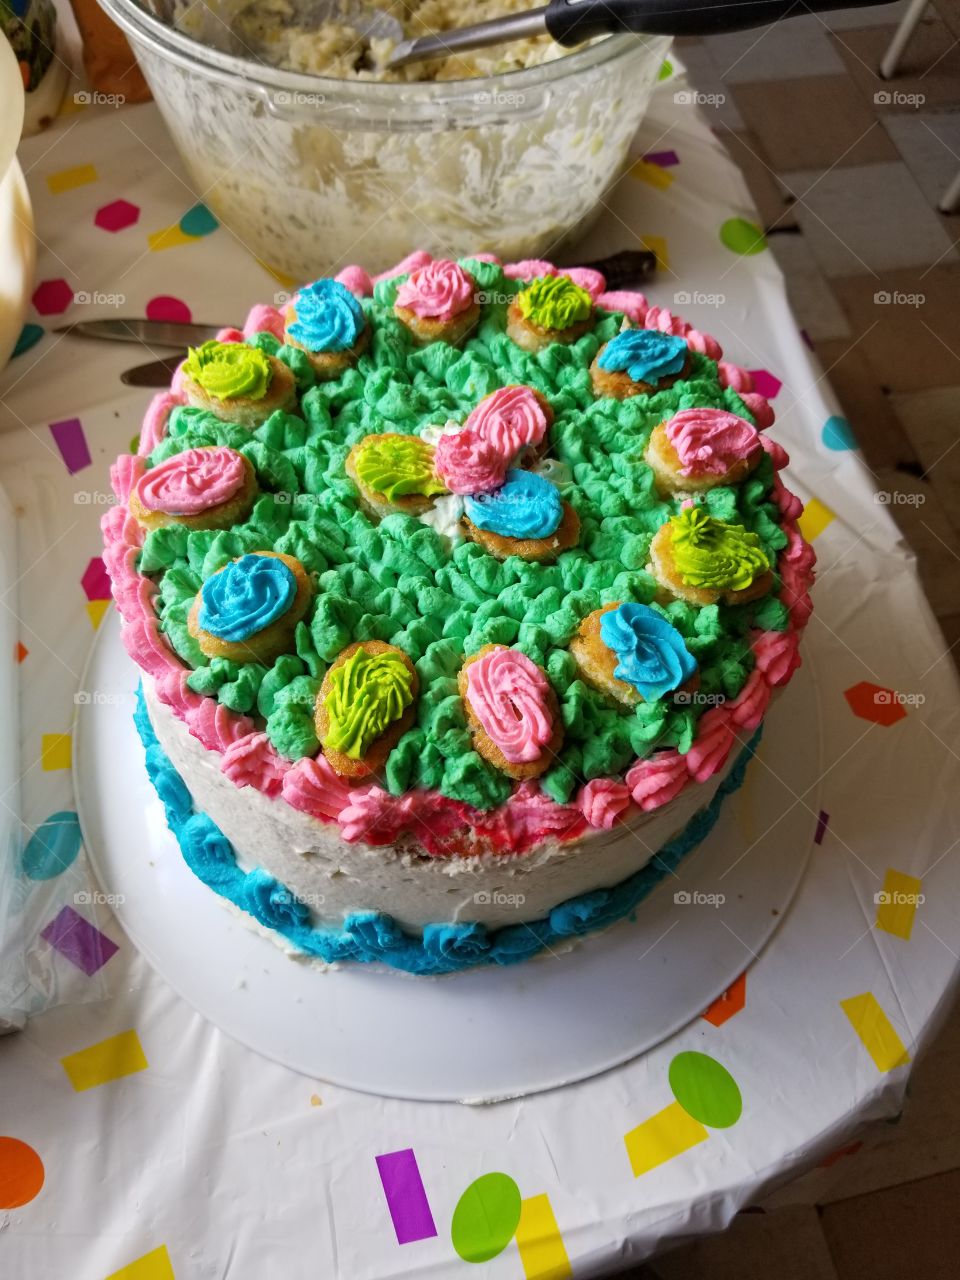 My home made Easter cake.